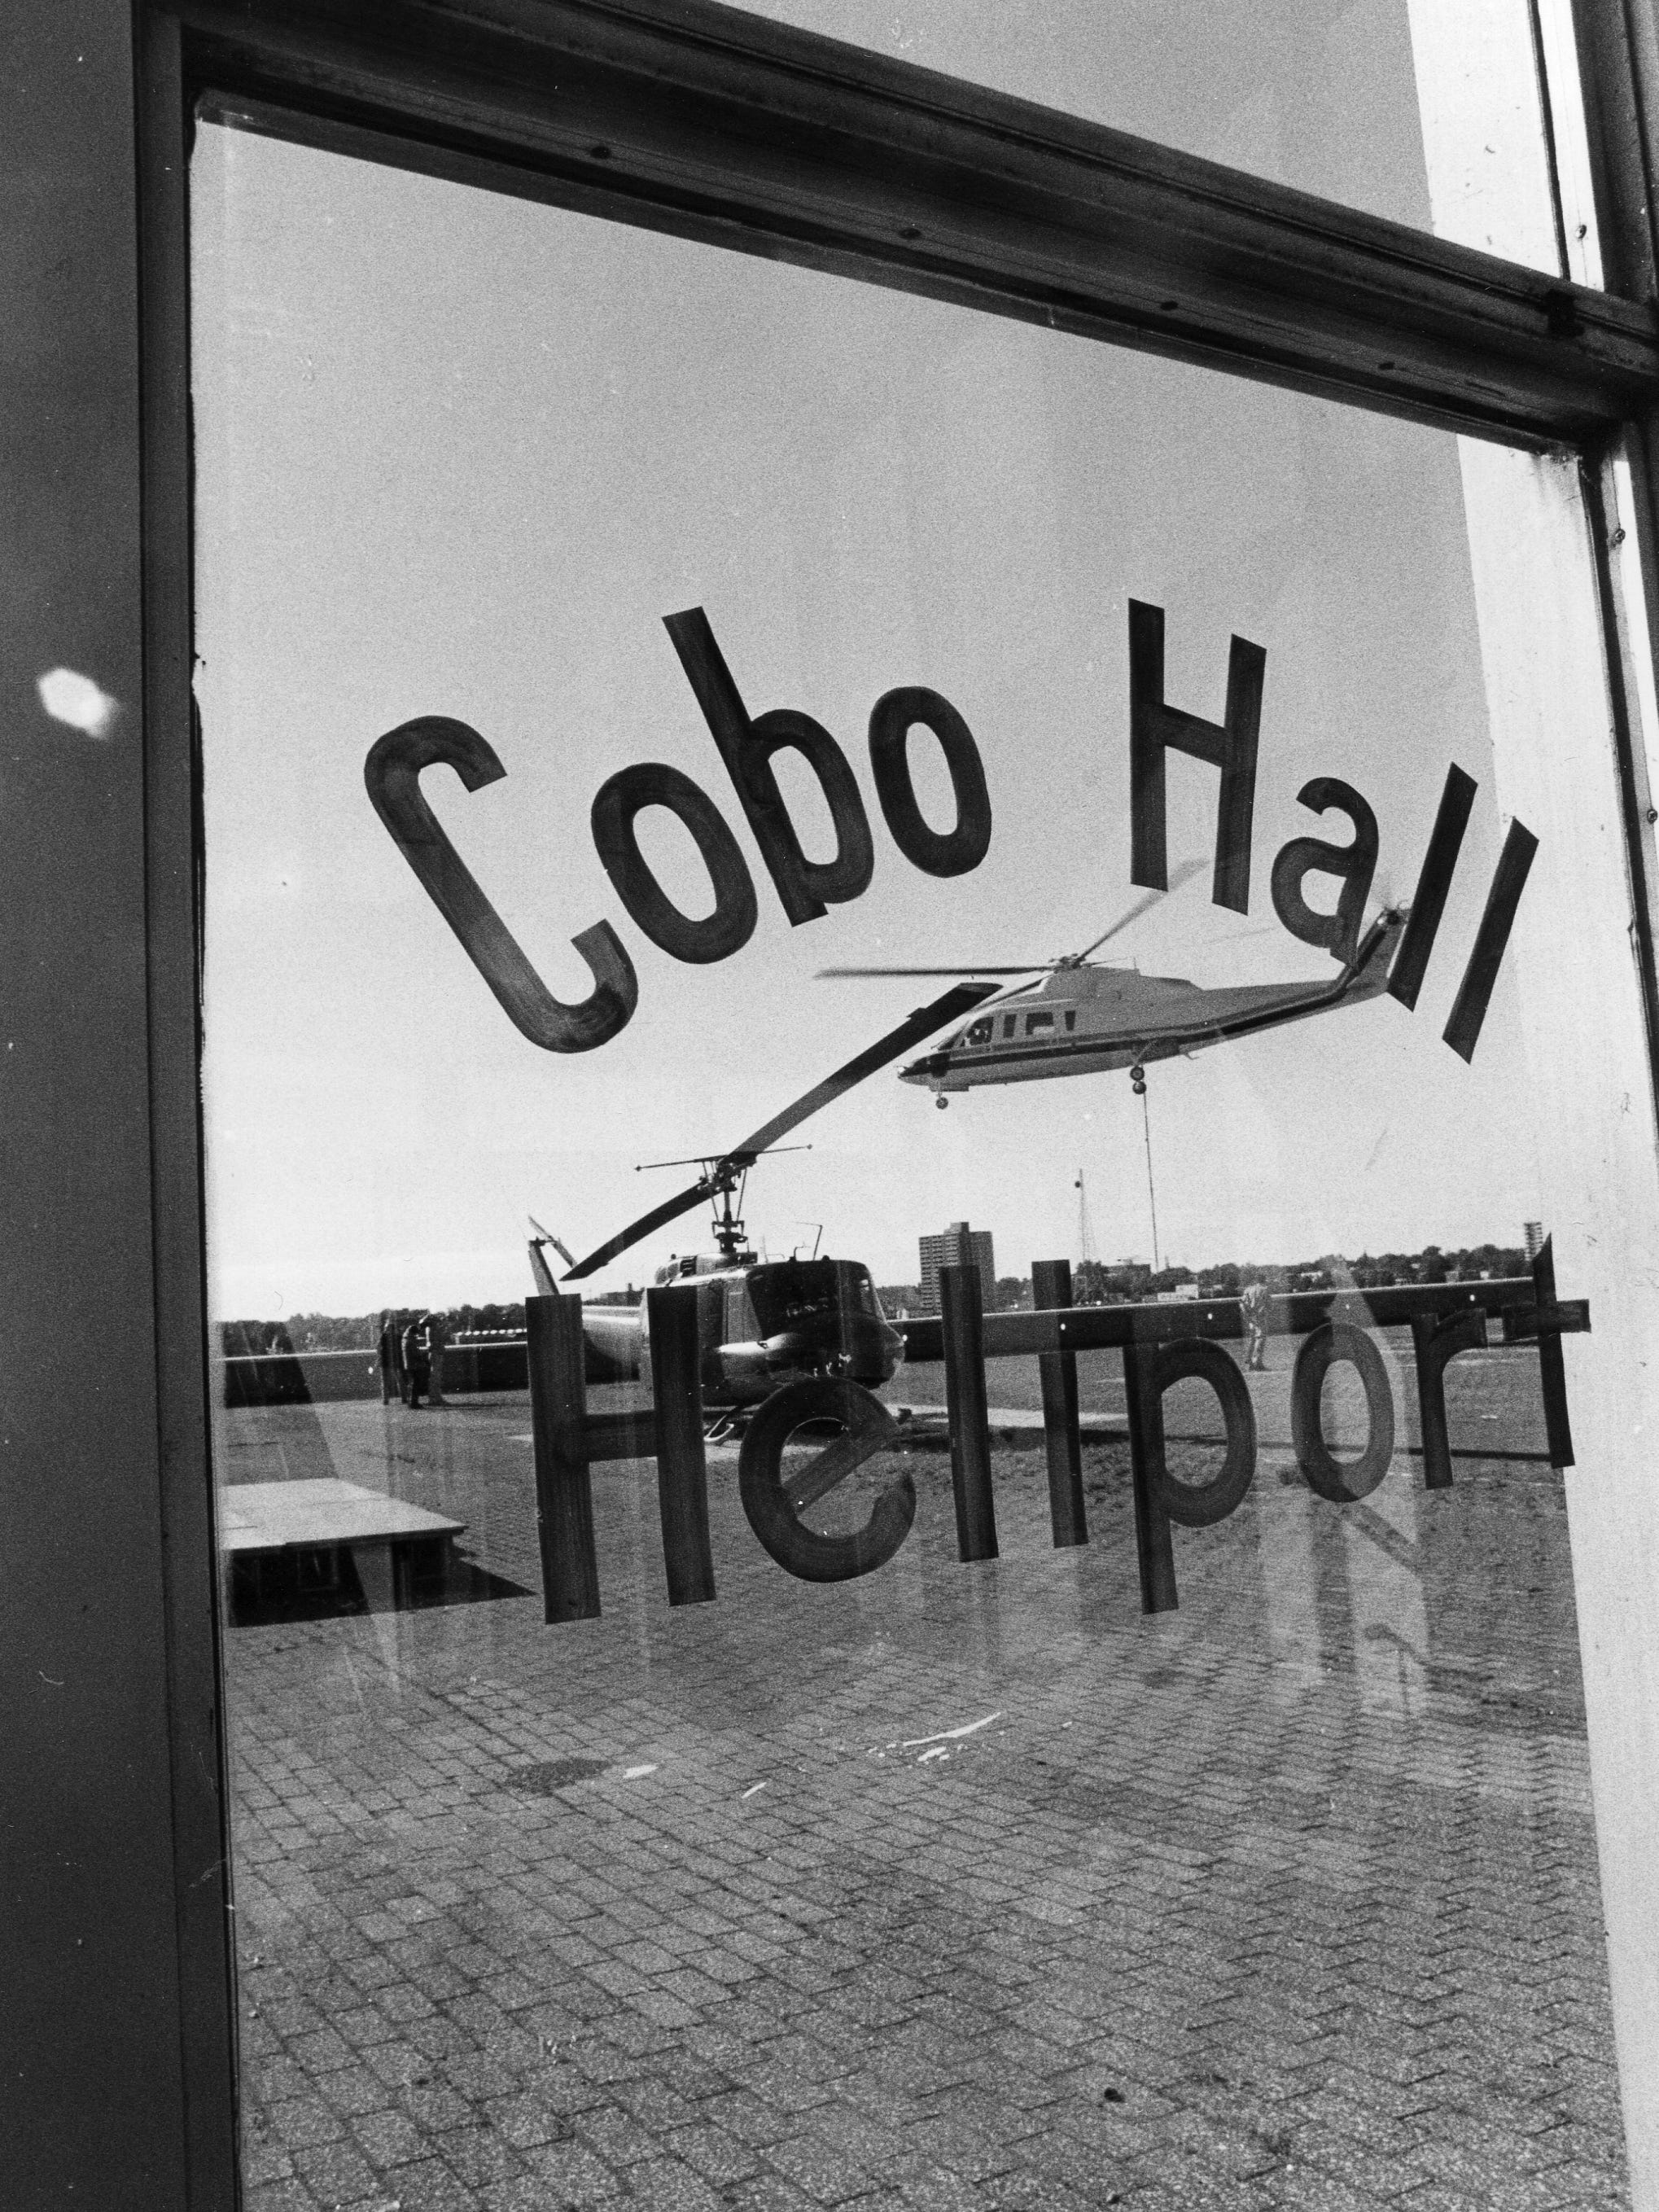 Helicopters take off at the Cobo Hall heliport on Oct. 13, 1988.